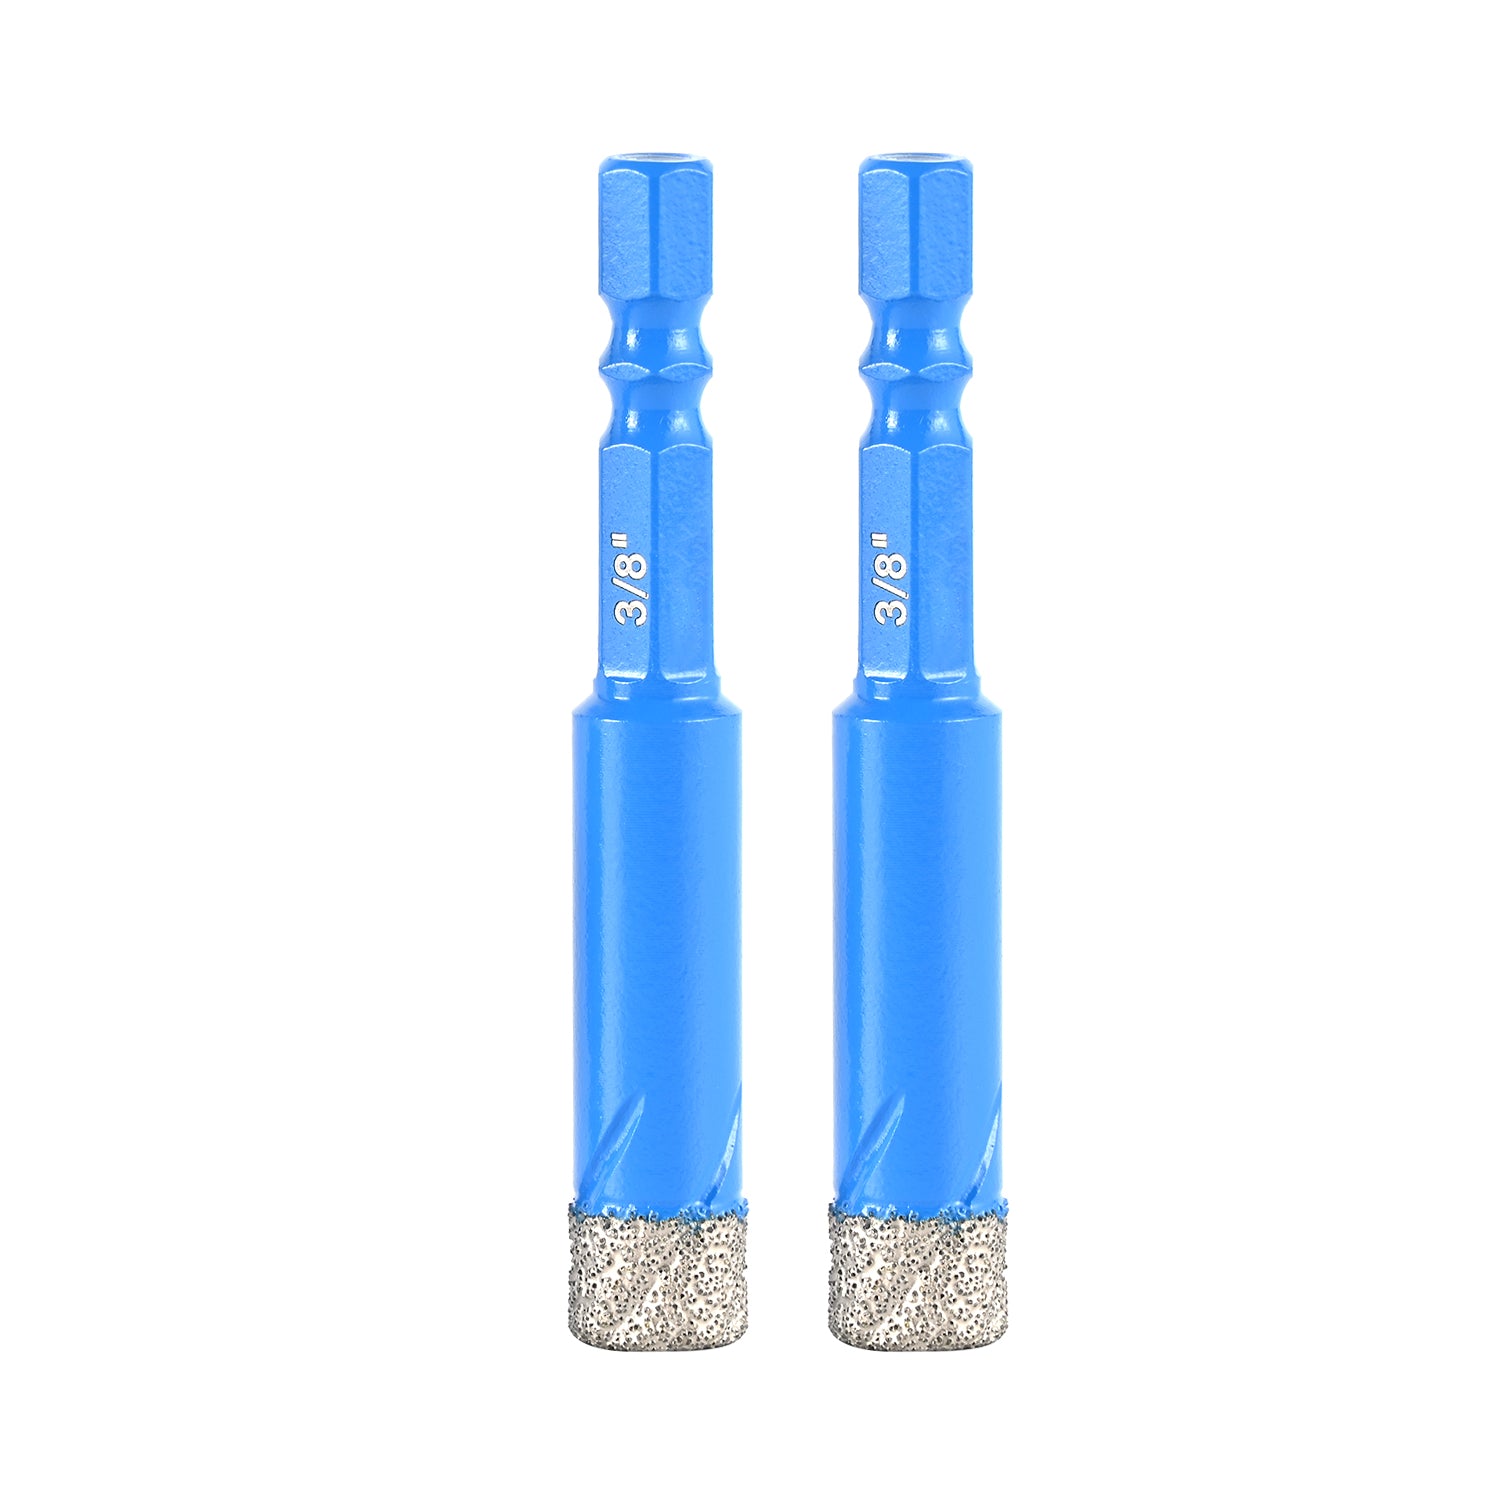 Dry Diamond Drill Bits with Quick Change Hex Shank for Glass Granite P